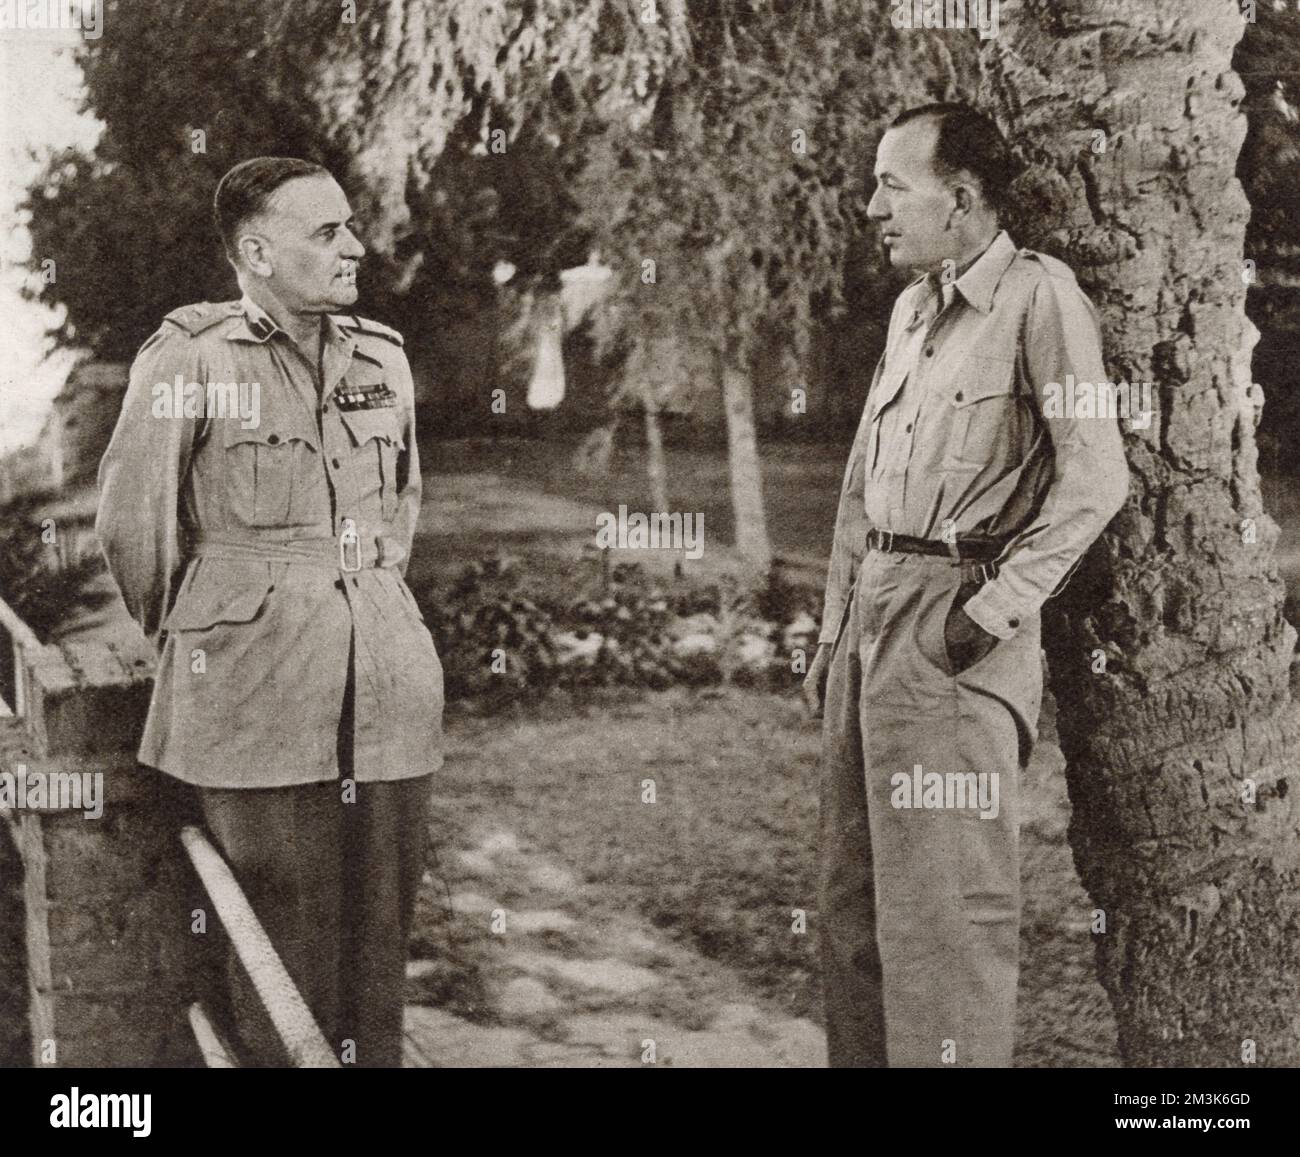 Noel Coward (1899 - 1973) (right), English playwright, actor and composer, talking to Lieut-General Sir H. Pownall during a tour of North Africa in 1943. Coward was then travelling in the region, entertaining British troops. Stock Photo